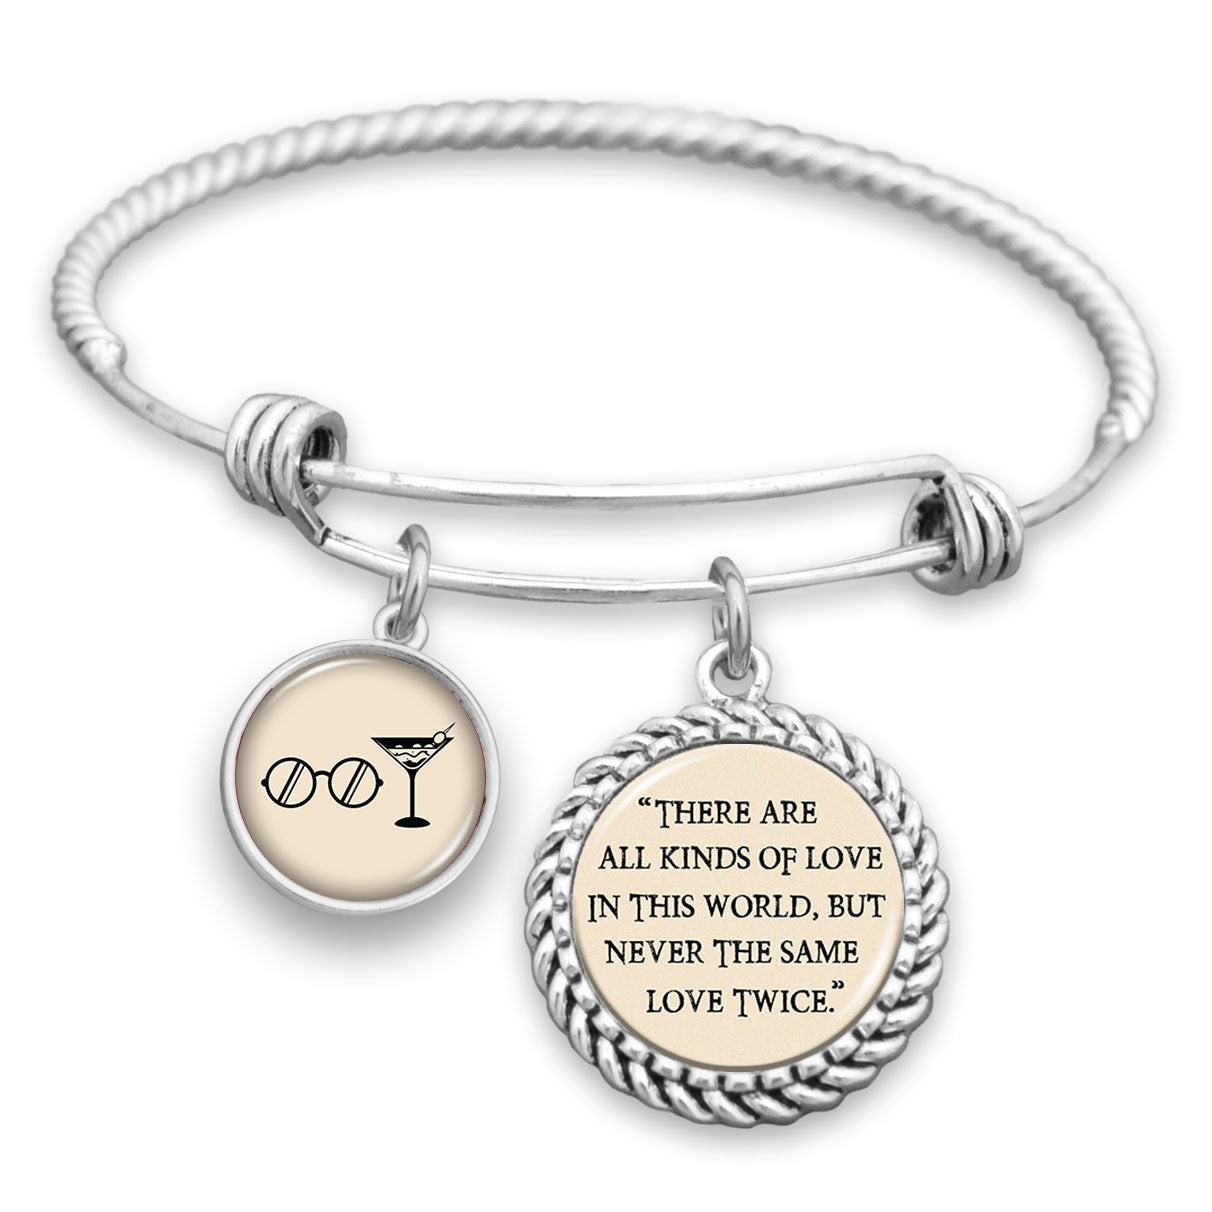 There Are All Kinds Of Love In This World, But Never The Same Love Twice Charm Bracelet